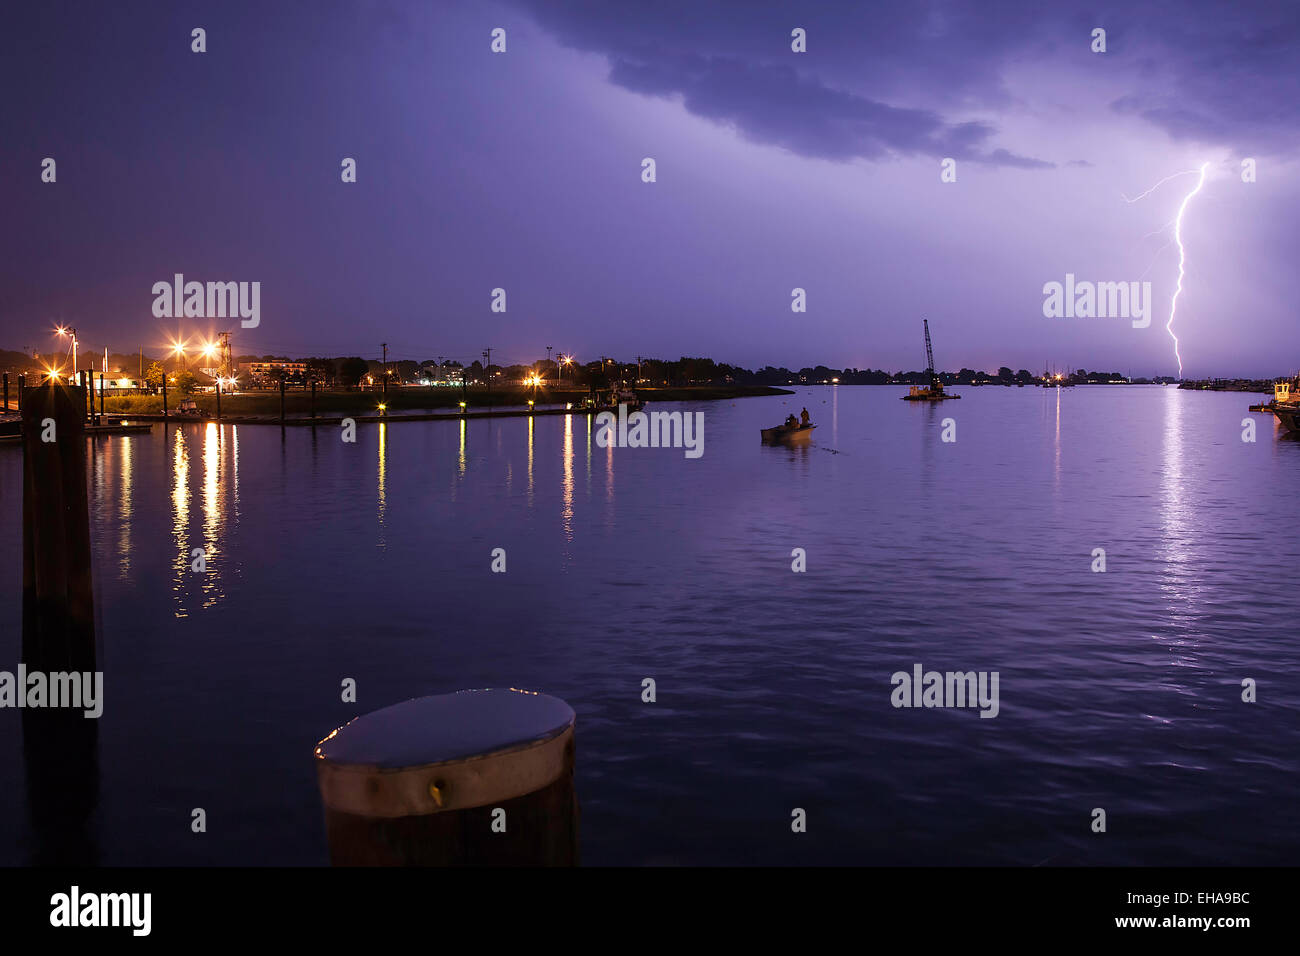 Lightning striking down over the harbor with a purple sky and a boat in the water. Stock Photo